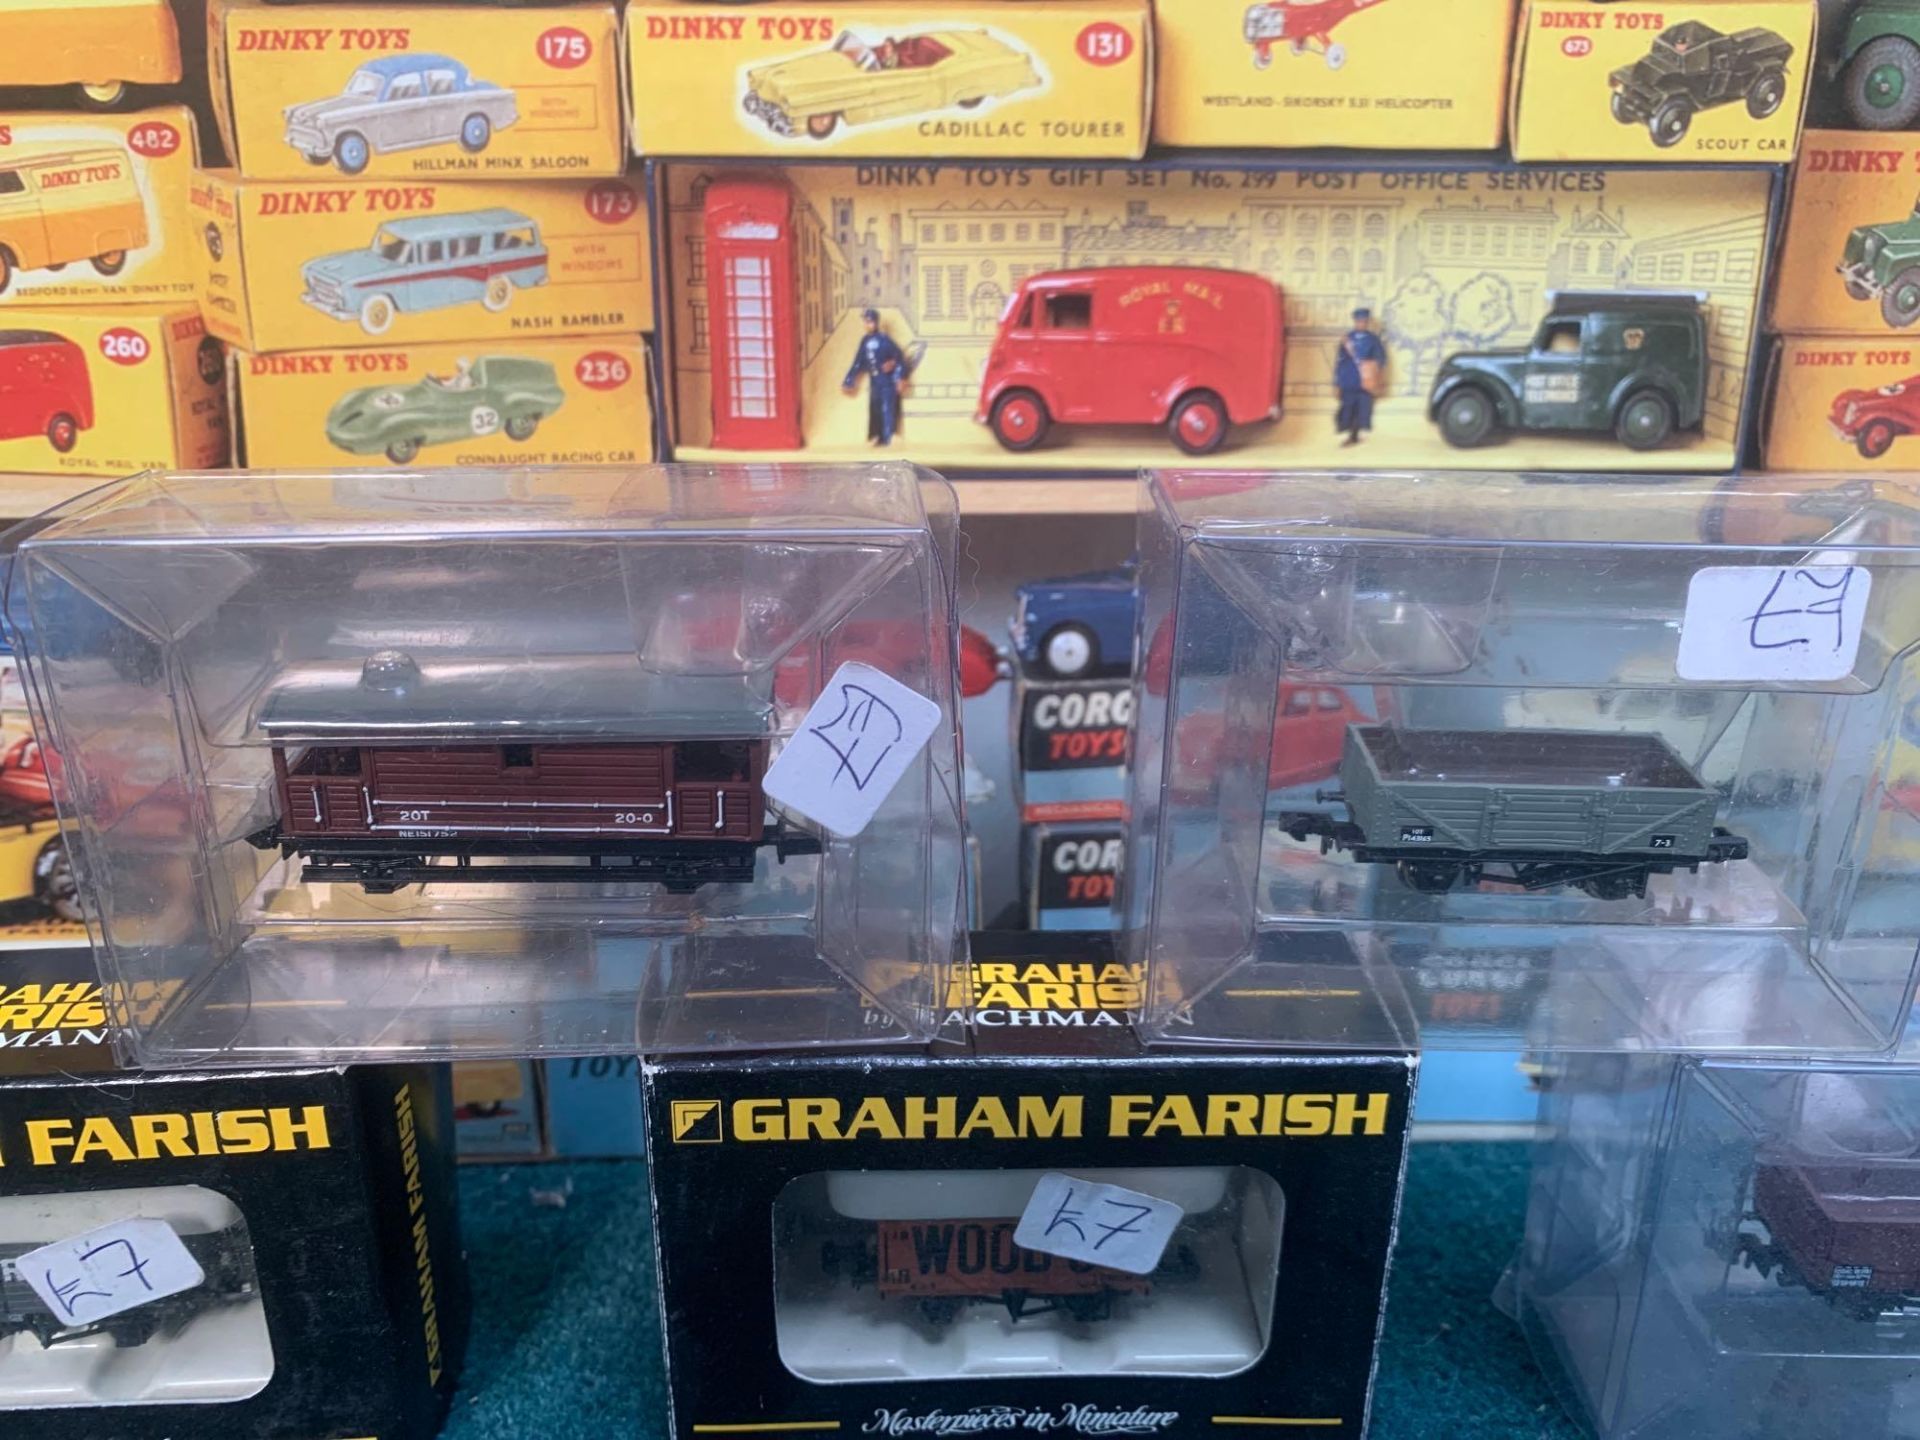 9 X Miniature Railway Models Includes Graham Farrish Models And PECO Models Carriageways Trains - Image 11 of 12